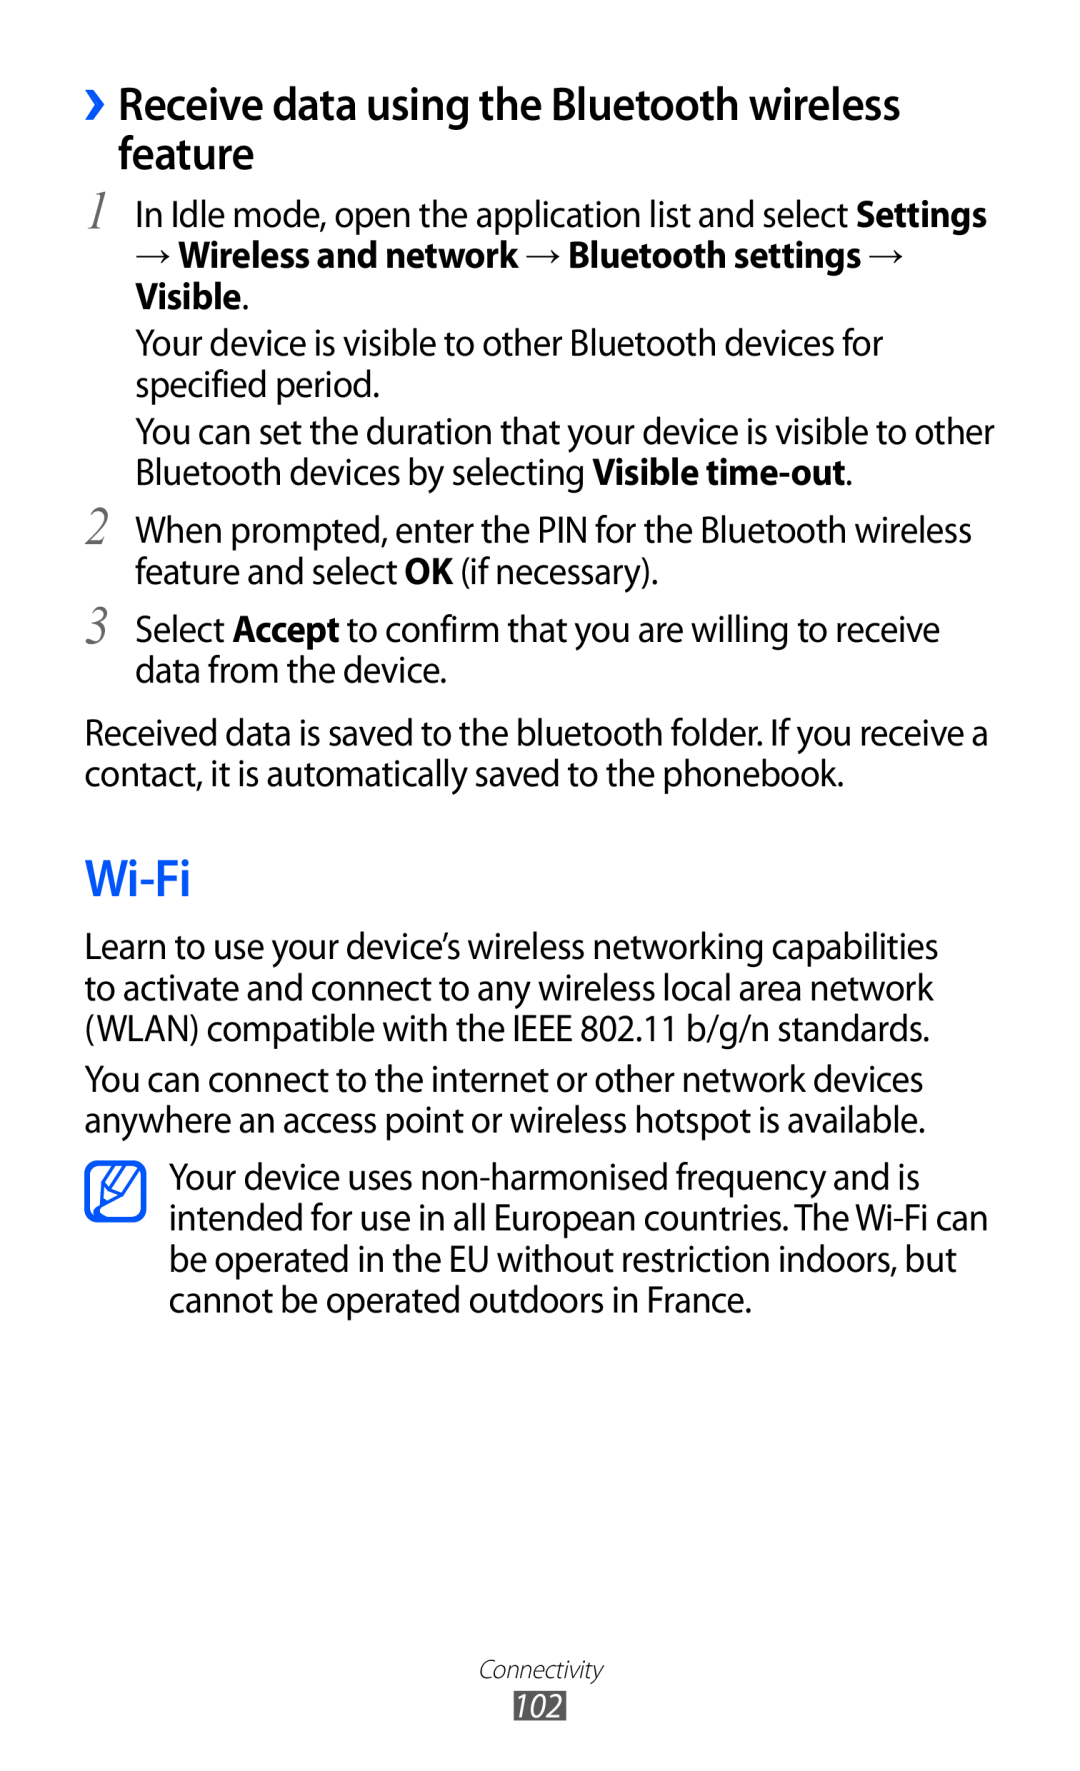 Samsung GT-I9070 user manual Wi-Fi, ››Receive data using the Bluetooth wireless feature 